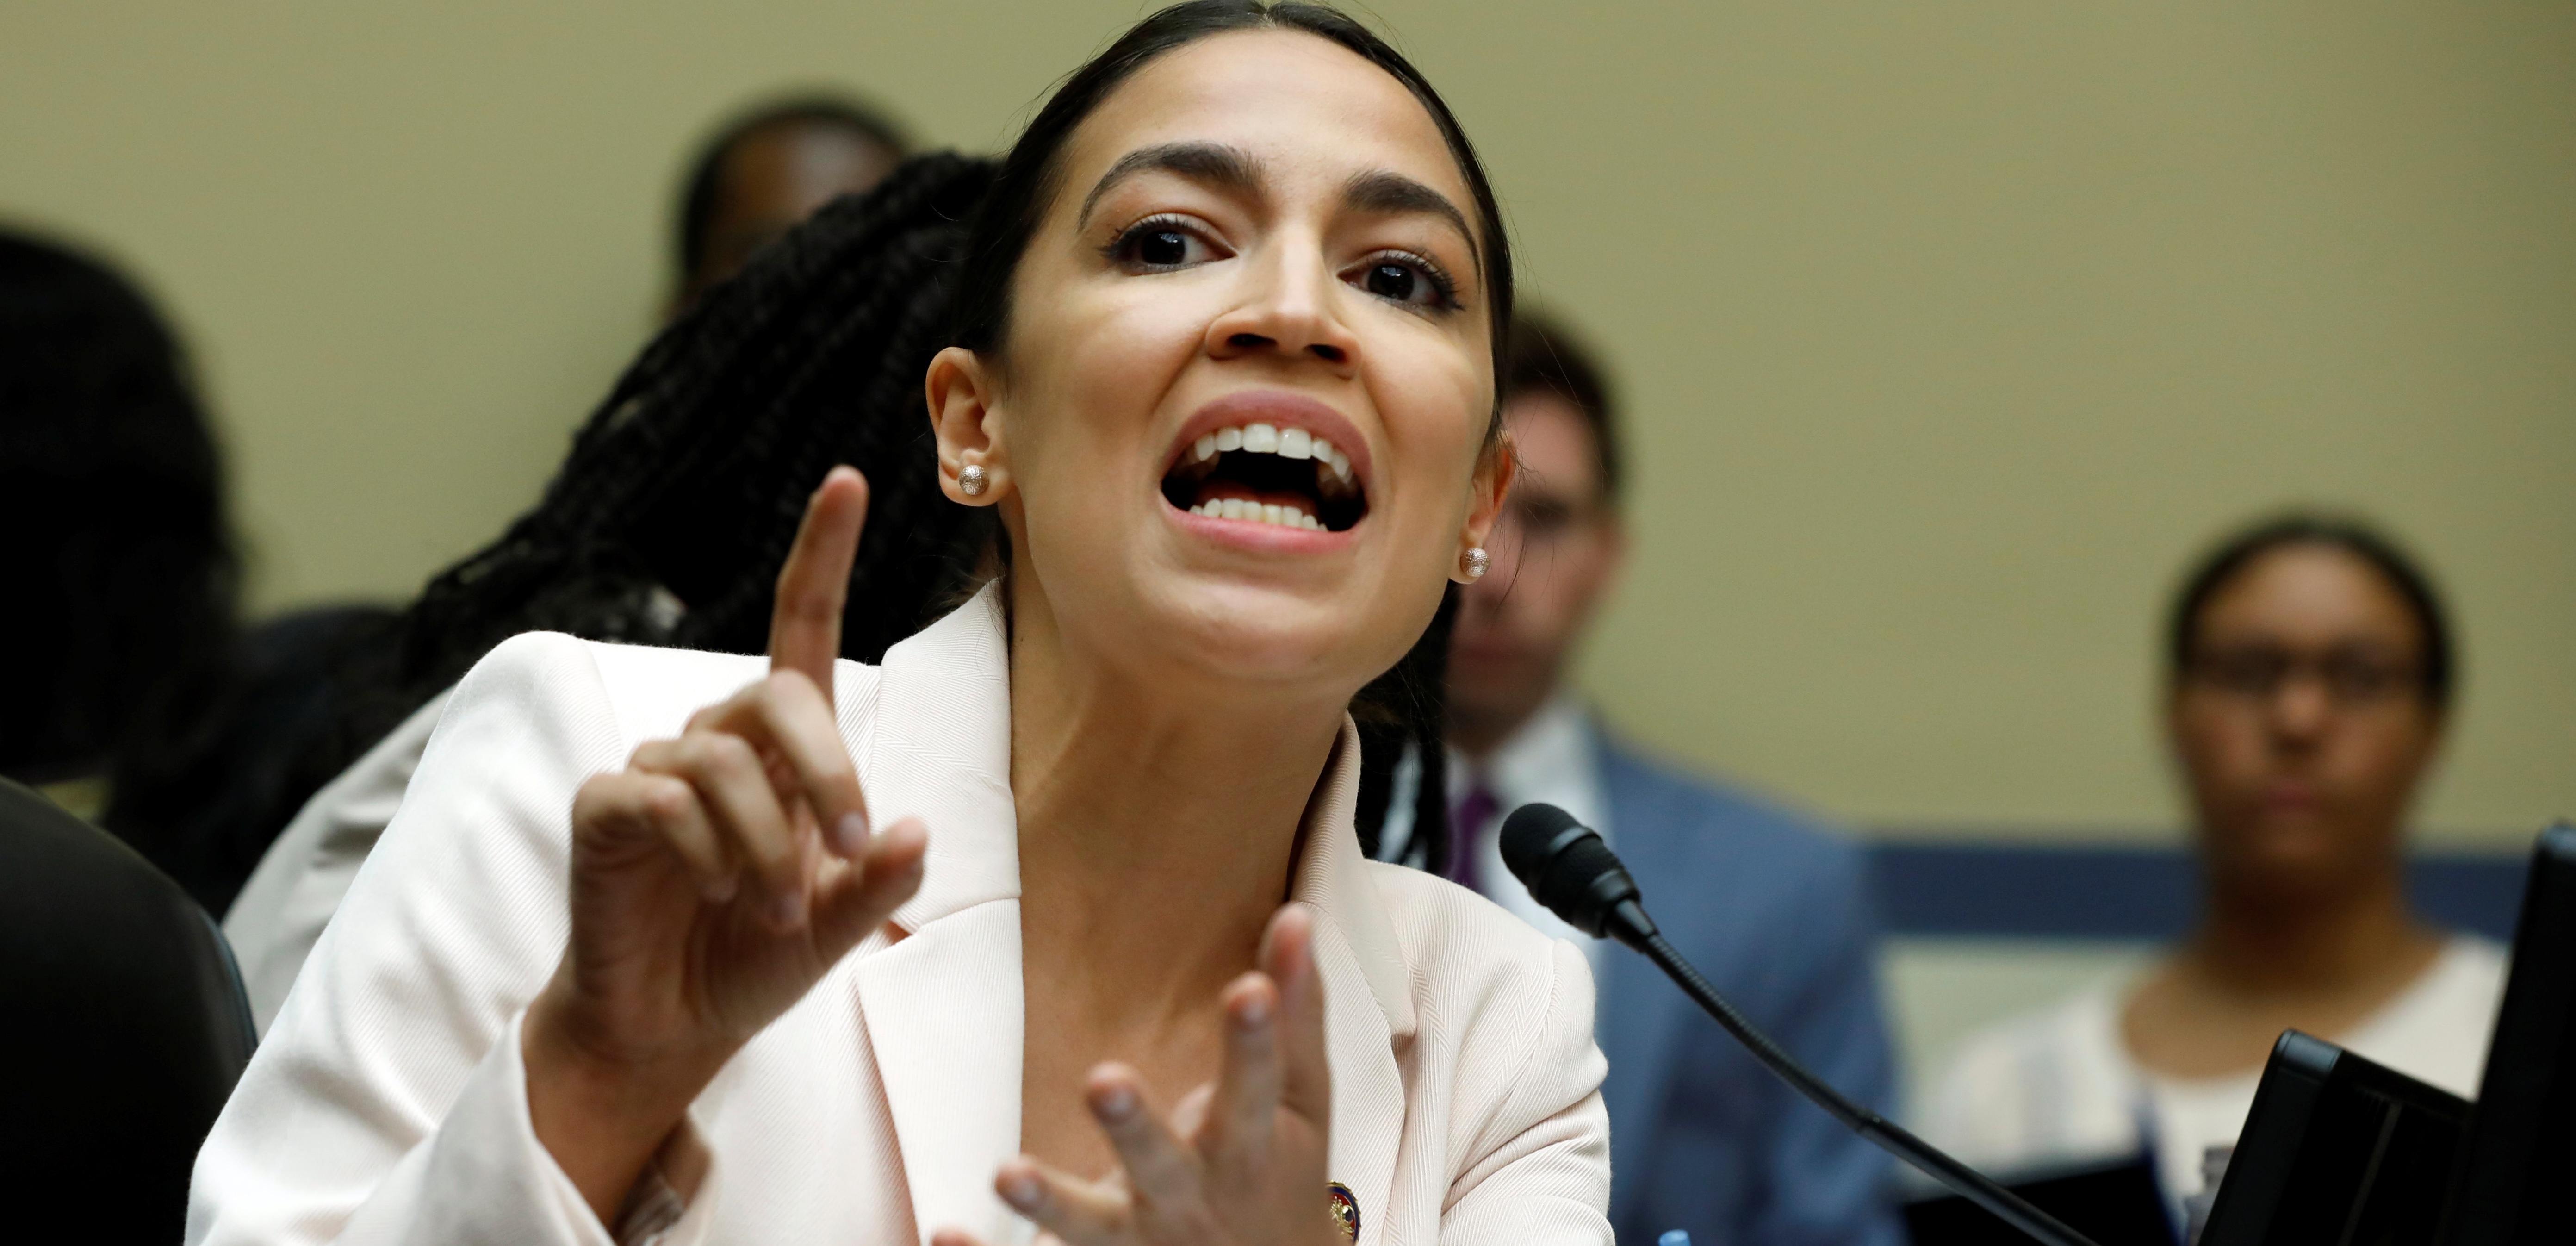 Rep. Alexandria Ocasio-Cortez (D-NY) speaks during House Oversight and Reform Committee hearing on contempt votes on whether to find Attorney General William Barr and Commerce Secretary Wilbur Ross in contempt of Congress for withholding Census documents on Capitol Hill in Washington, U.S., June 12, 2019. REUTERS/Yuri Gripas